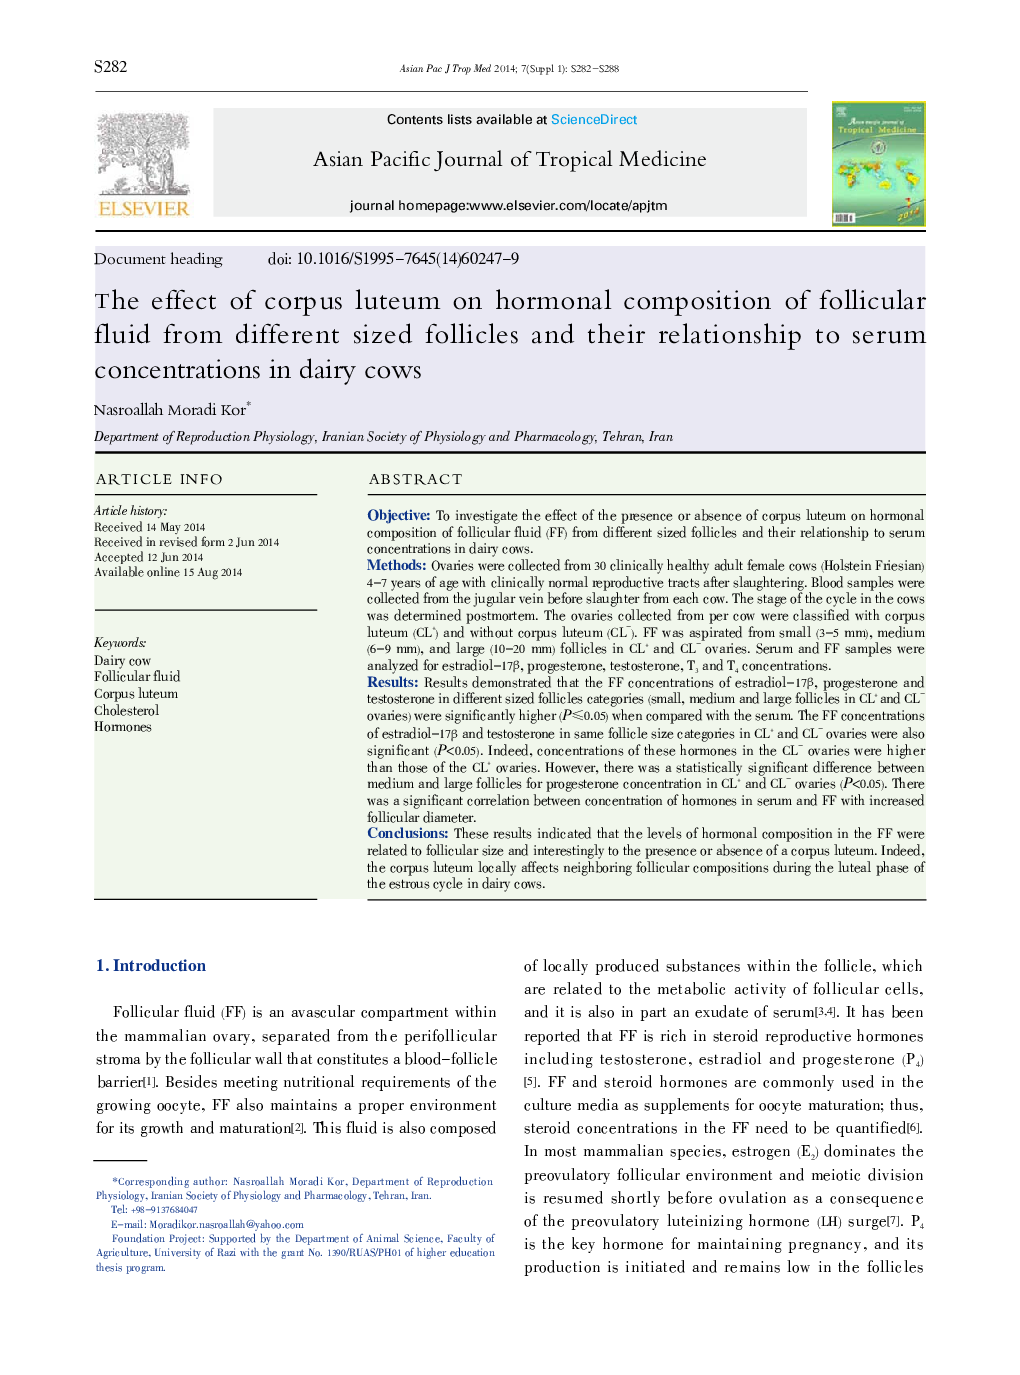 The effect of corpus luteum on hormonal composition of follicular fluid from different sized follicles and their relationship to serum concentrations in dairy cows 